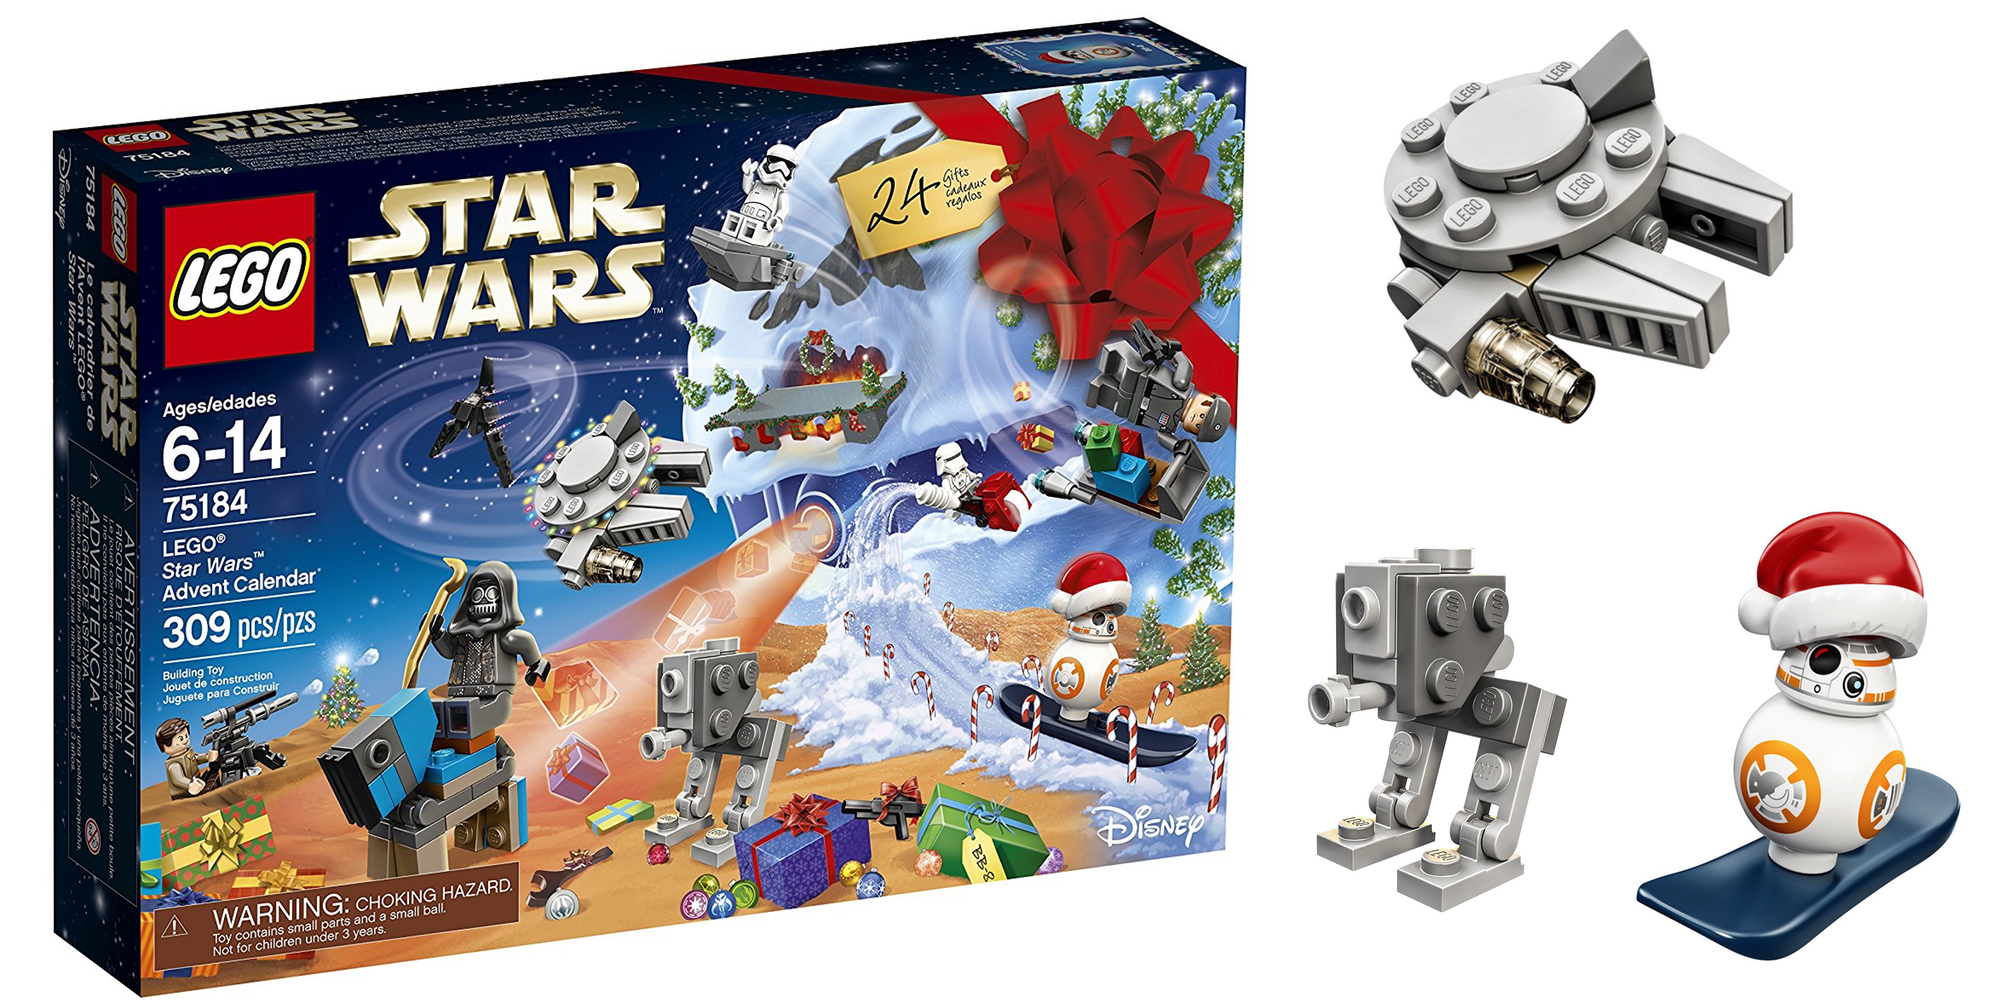 LEGO Star Wars Advent Calendar has dropped to a new alltime low at 29.50